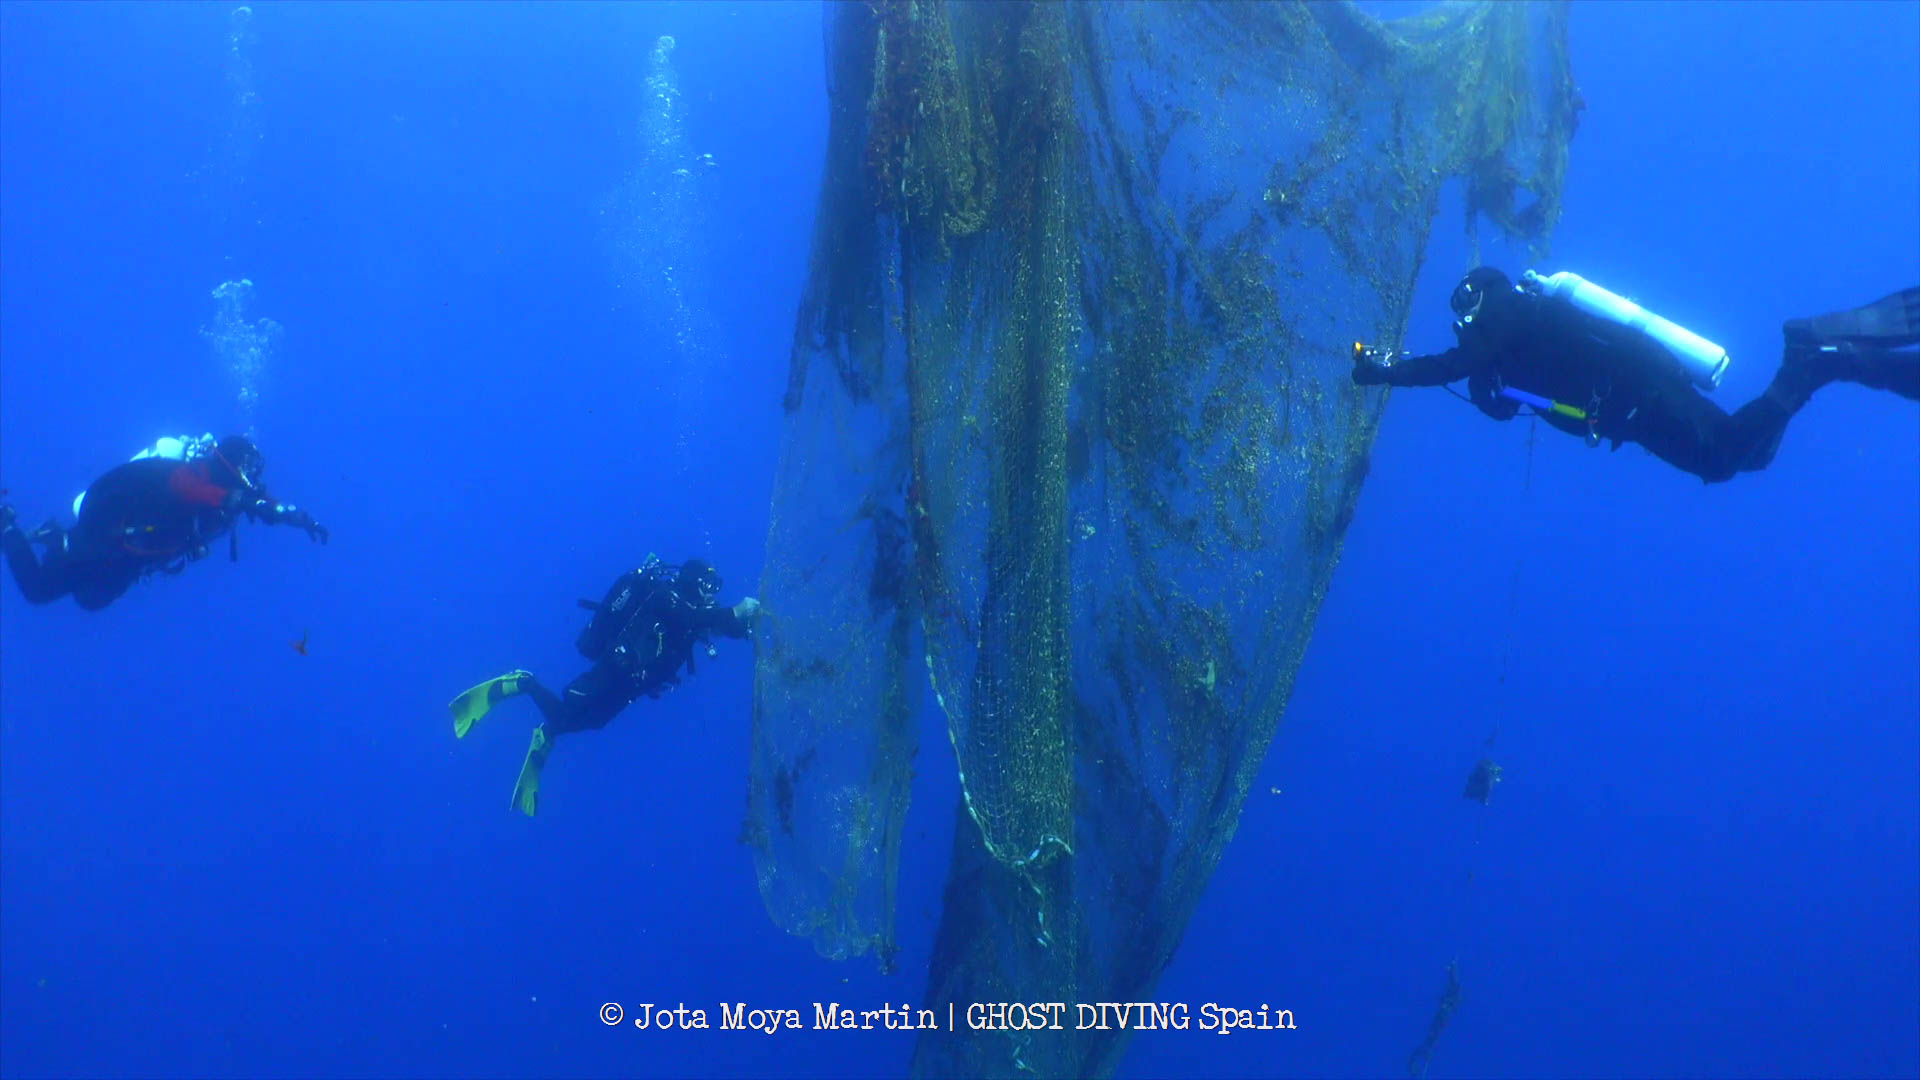 fishing net weighing 450 kgs removed from reef in Tossa de Mar